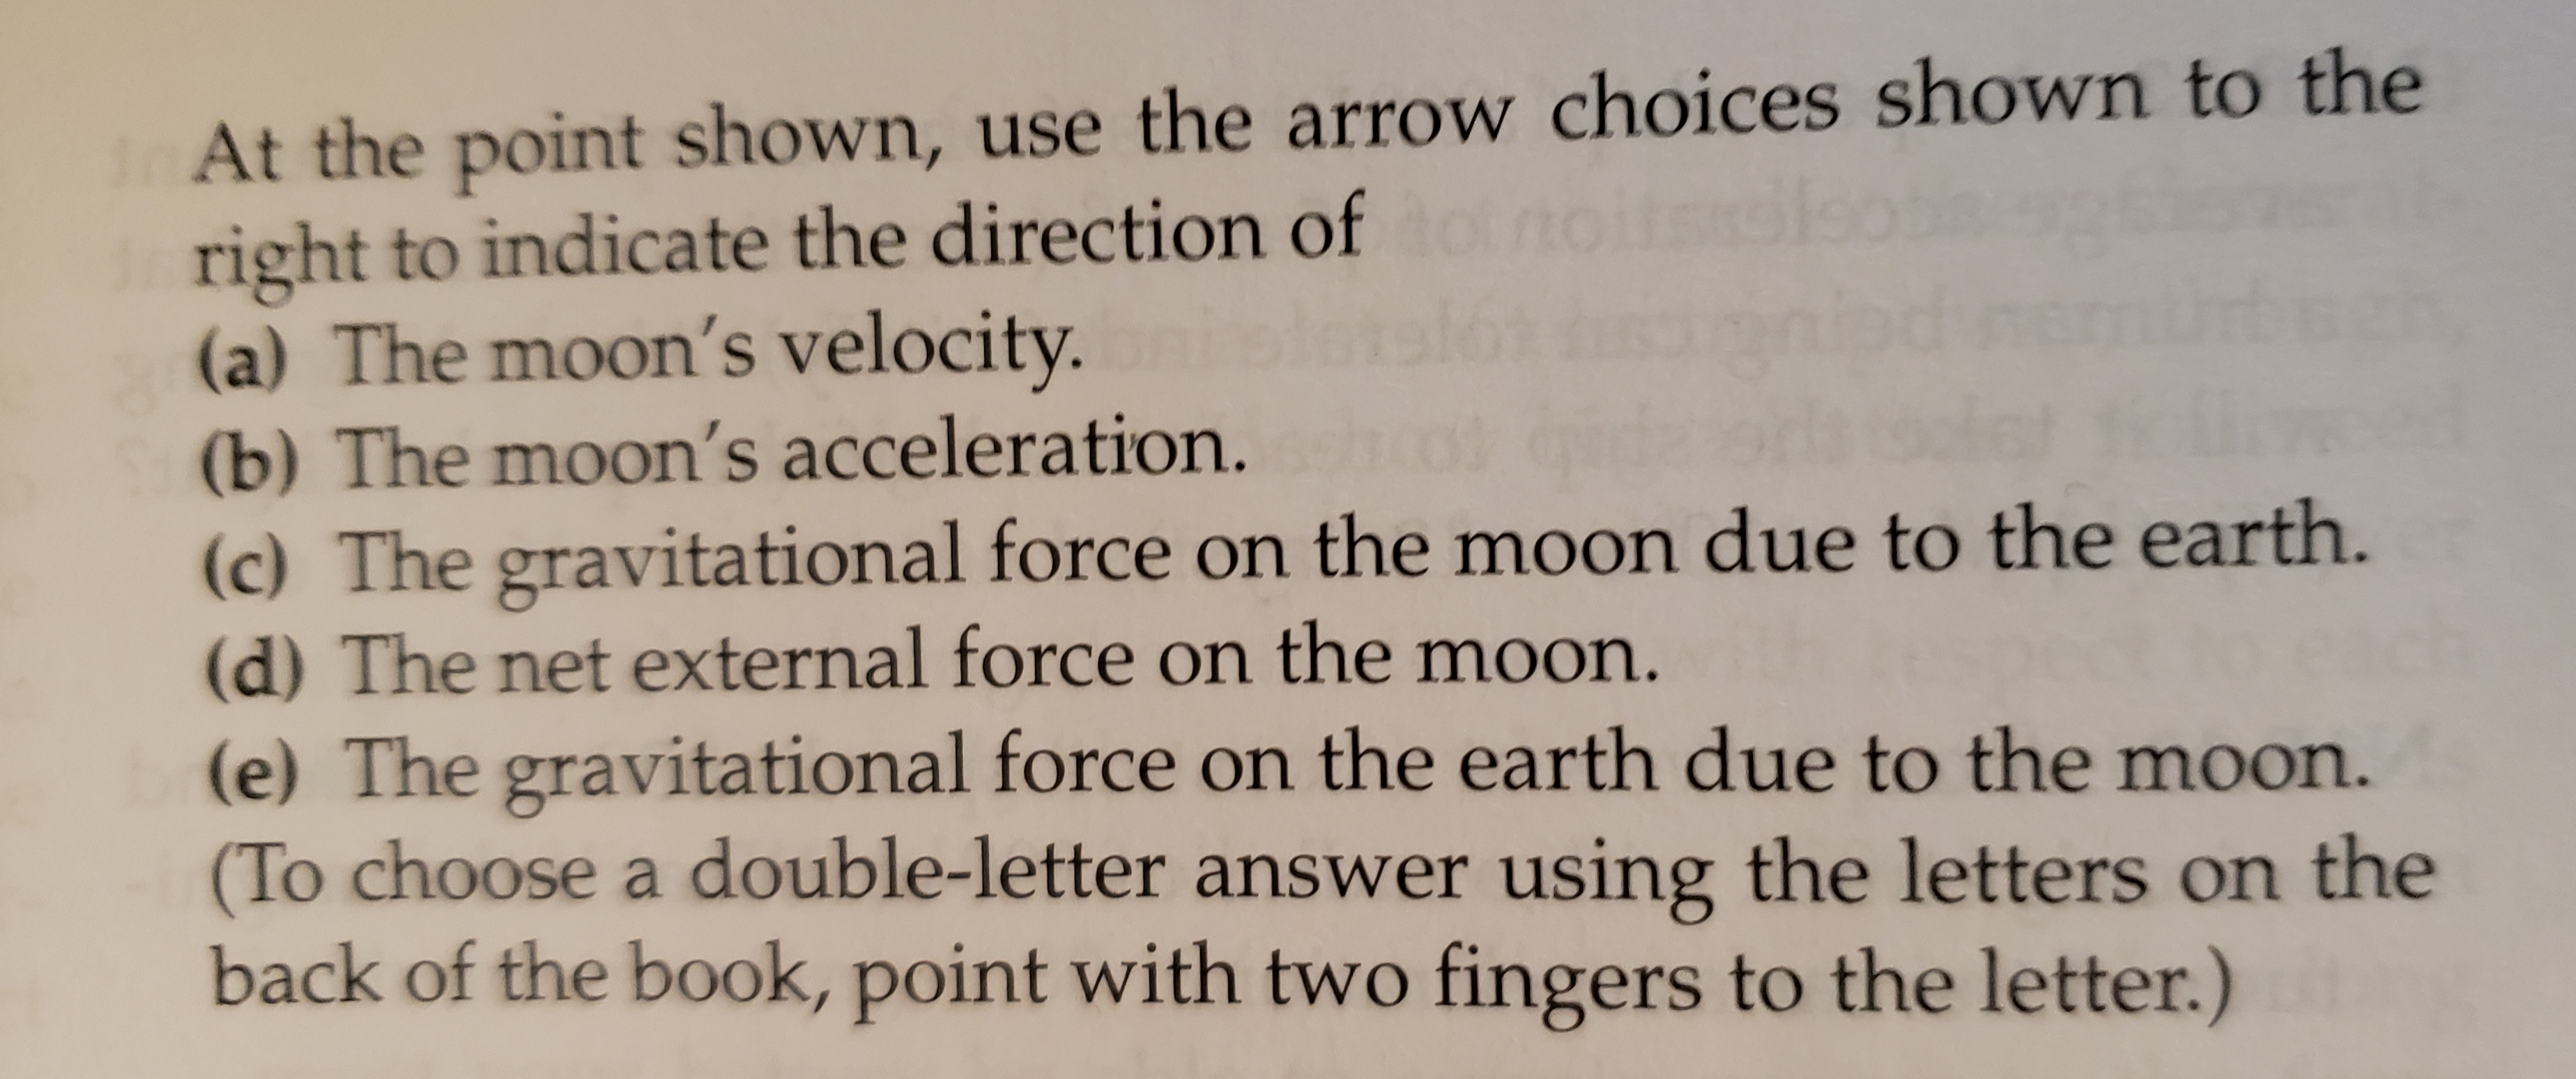 InAt the point shown, use the arrow choices shown to the
right to indicate the direction of to
(a) The moon's velocity.
(b) The moon's acceleration.
(c) The gravitational force on the moon due to the earth.
(d) The net external force on the moon.
(e) The gravitational force on the earth due to the moon.
(To choose a double-letter answer usirng the letters on the
back of the book, point with two fingers to the letter.)
Sls
6
